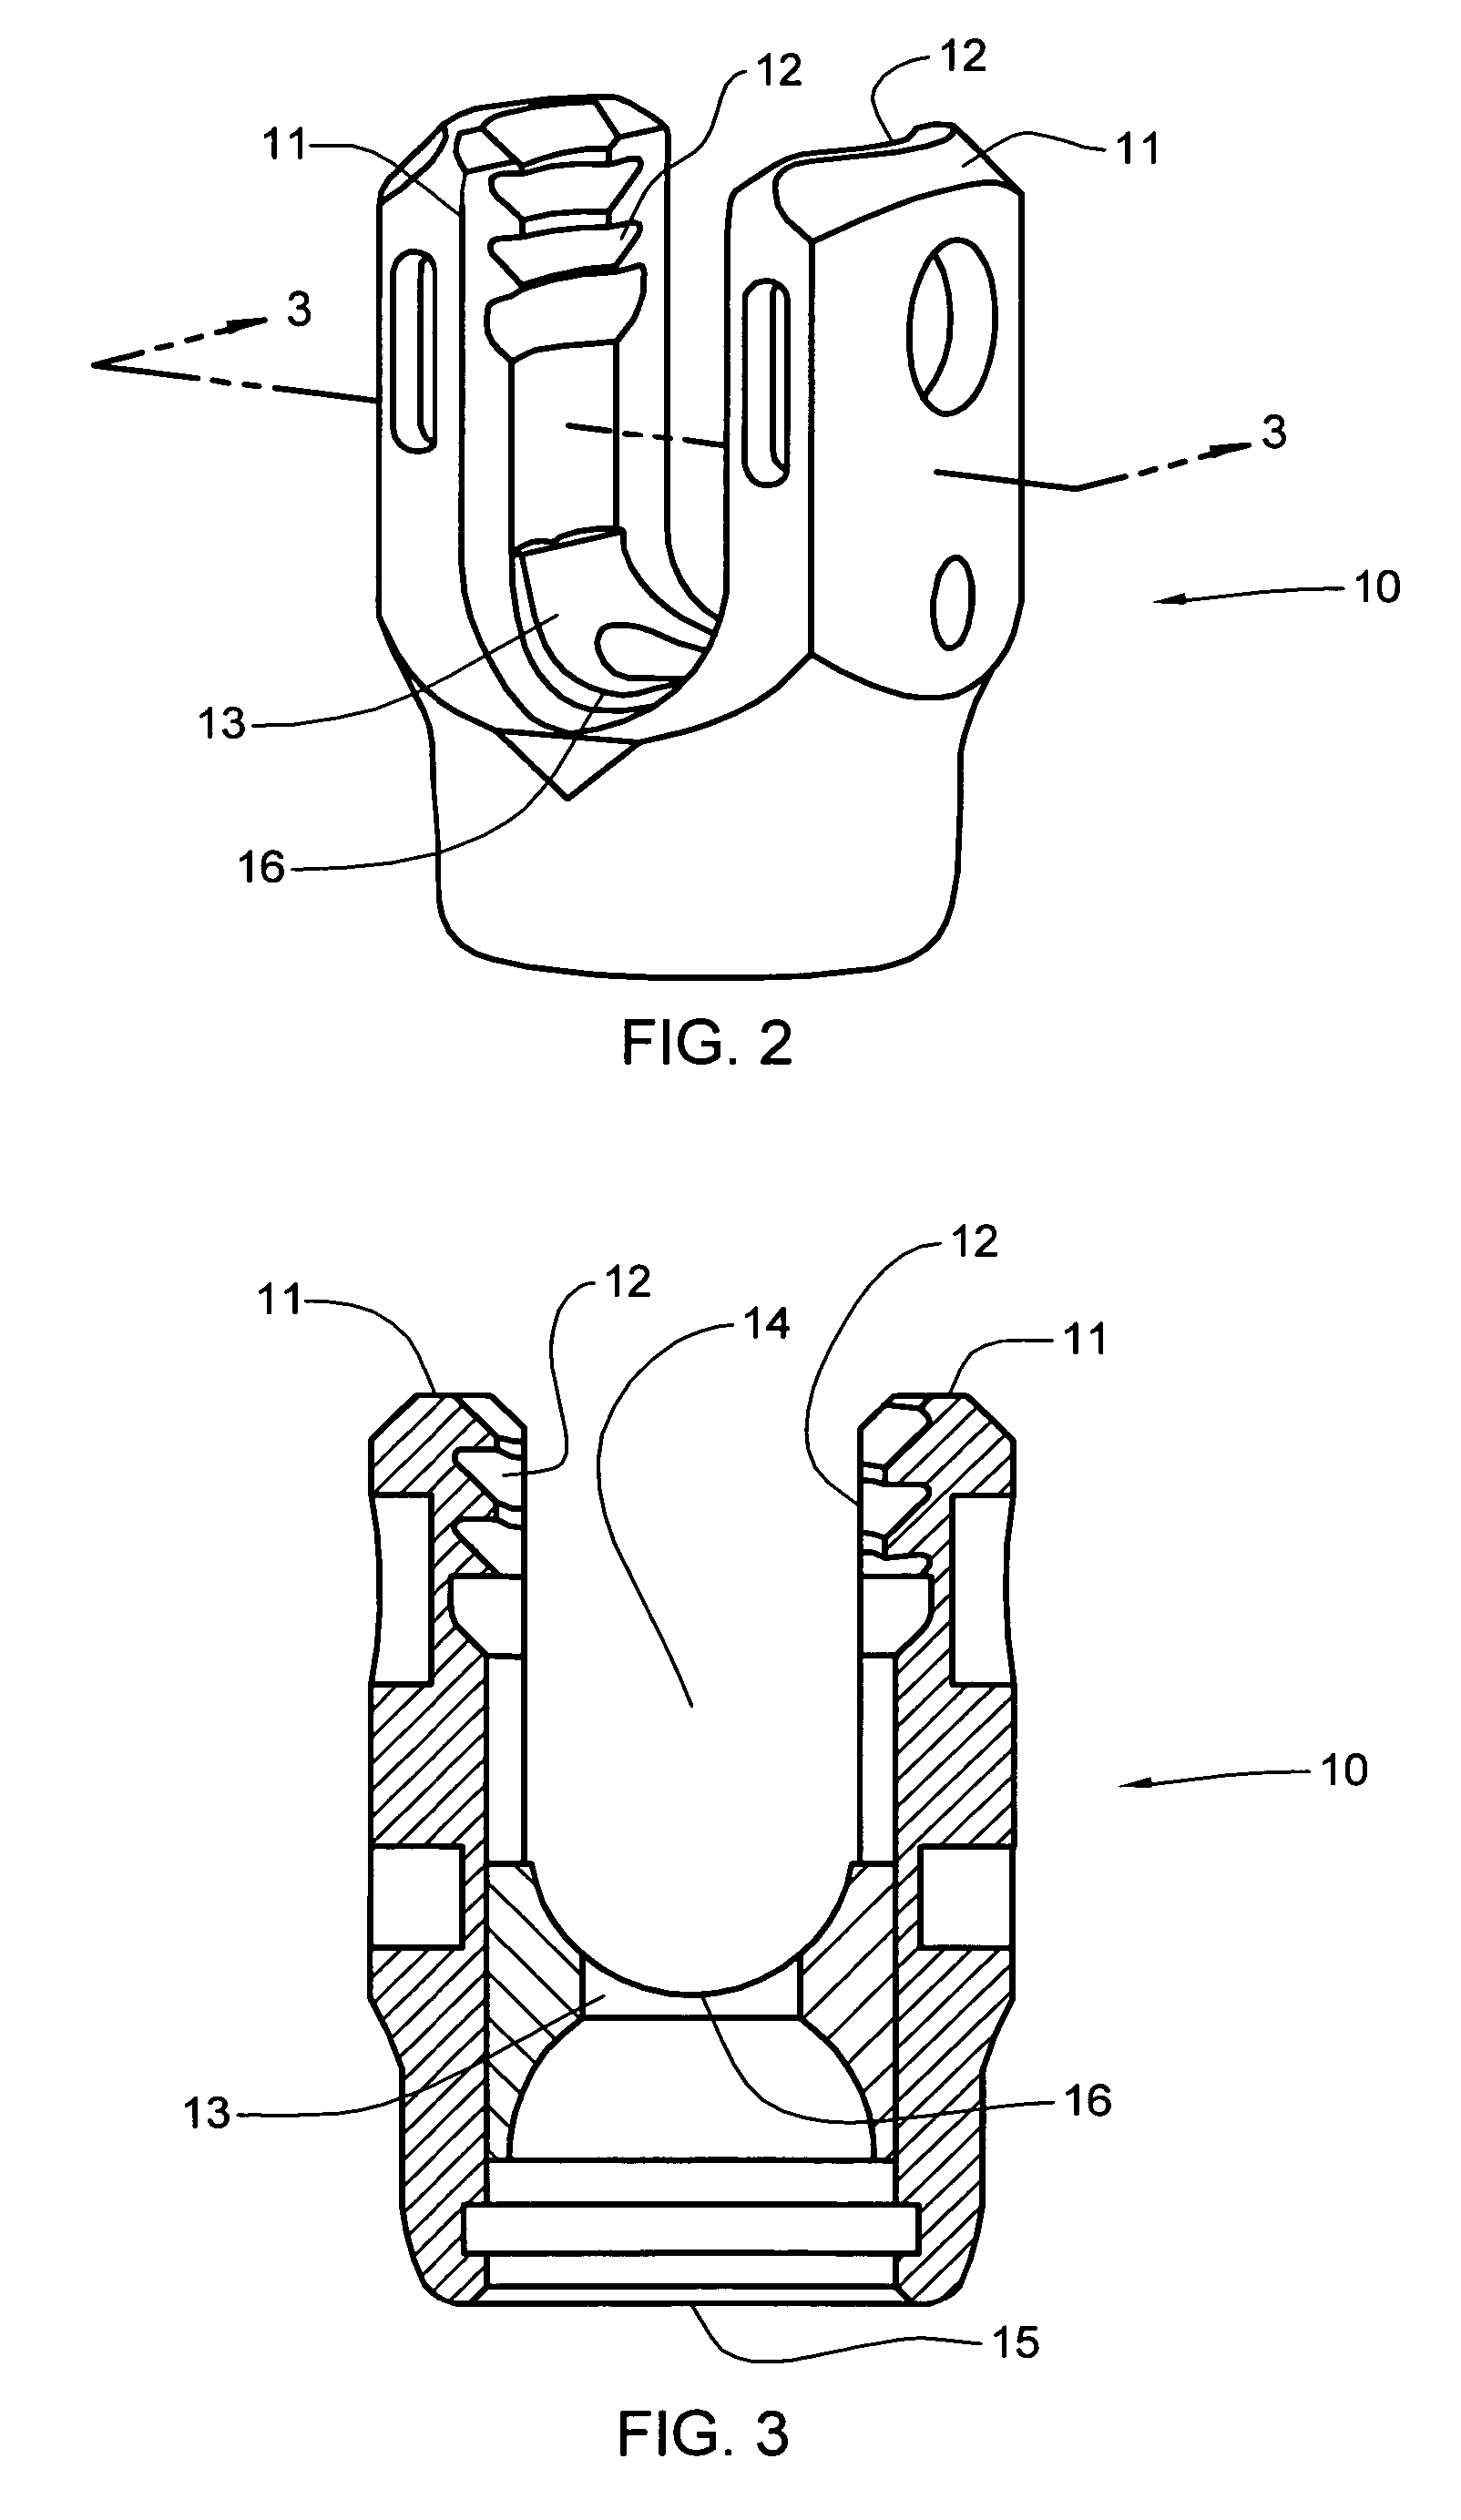 Locking device and method, for use in a bone stabilization system, employing a set screw member and deformable saddle member